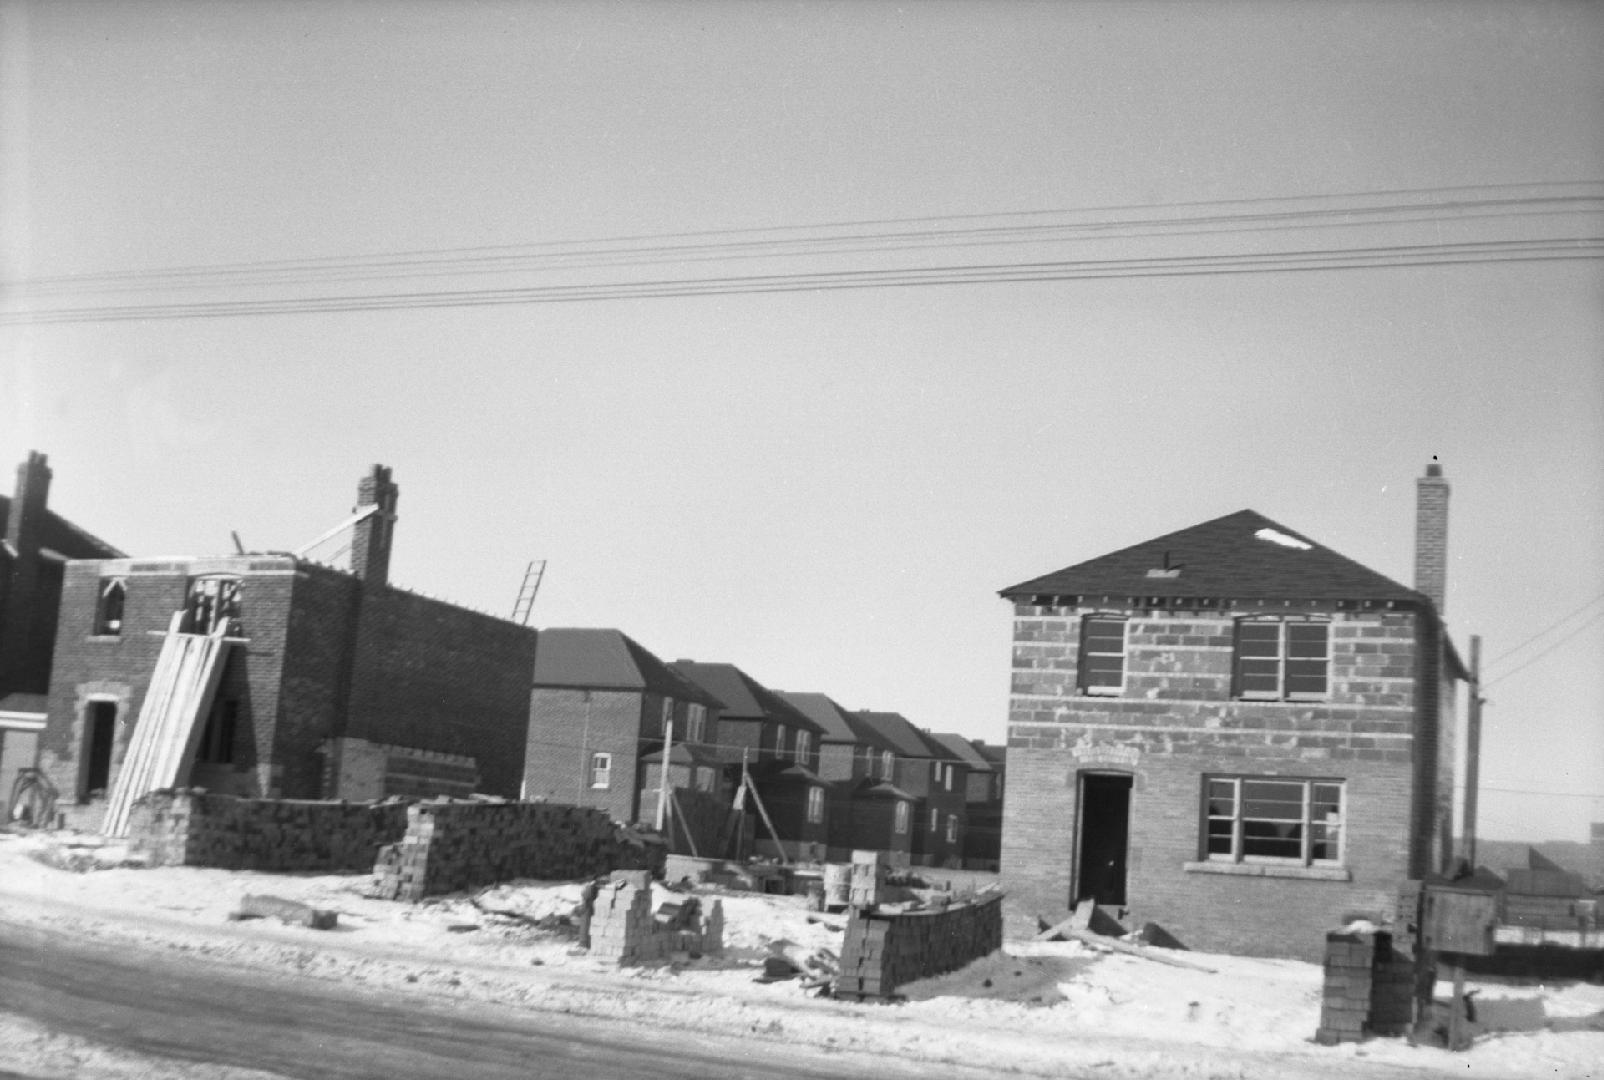 Image shows houses under construction.